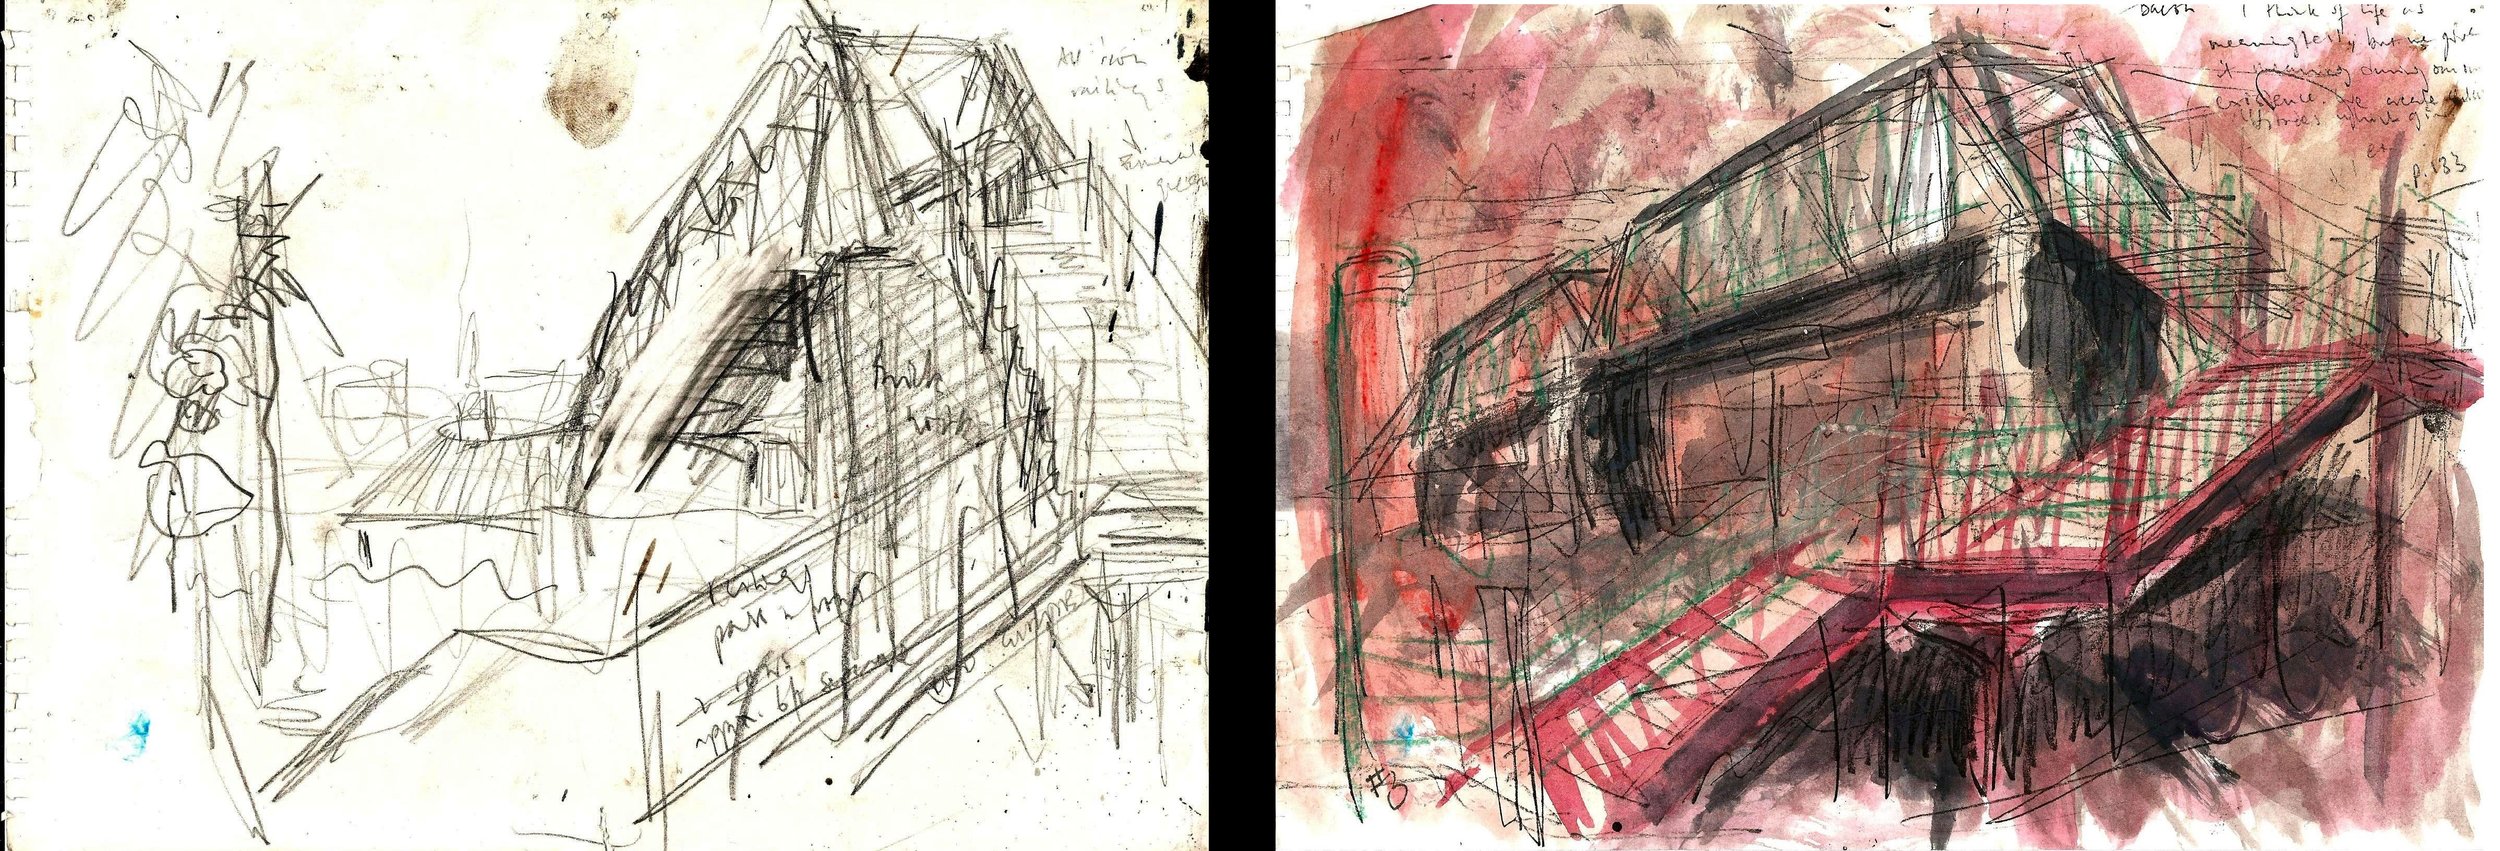  Studies, "Jacob's Ladder, London W13" (1991)  pencil on paper. 8" x 11", pencil and watercolor on paper,&nbsp;8" x 11" 